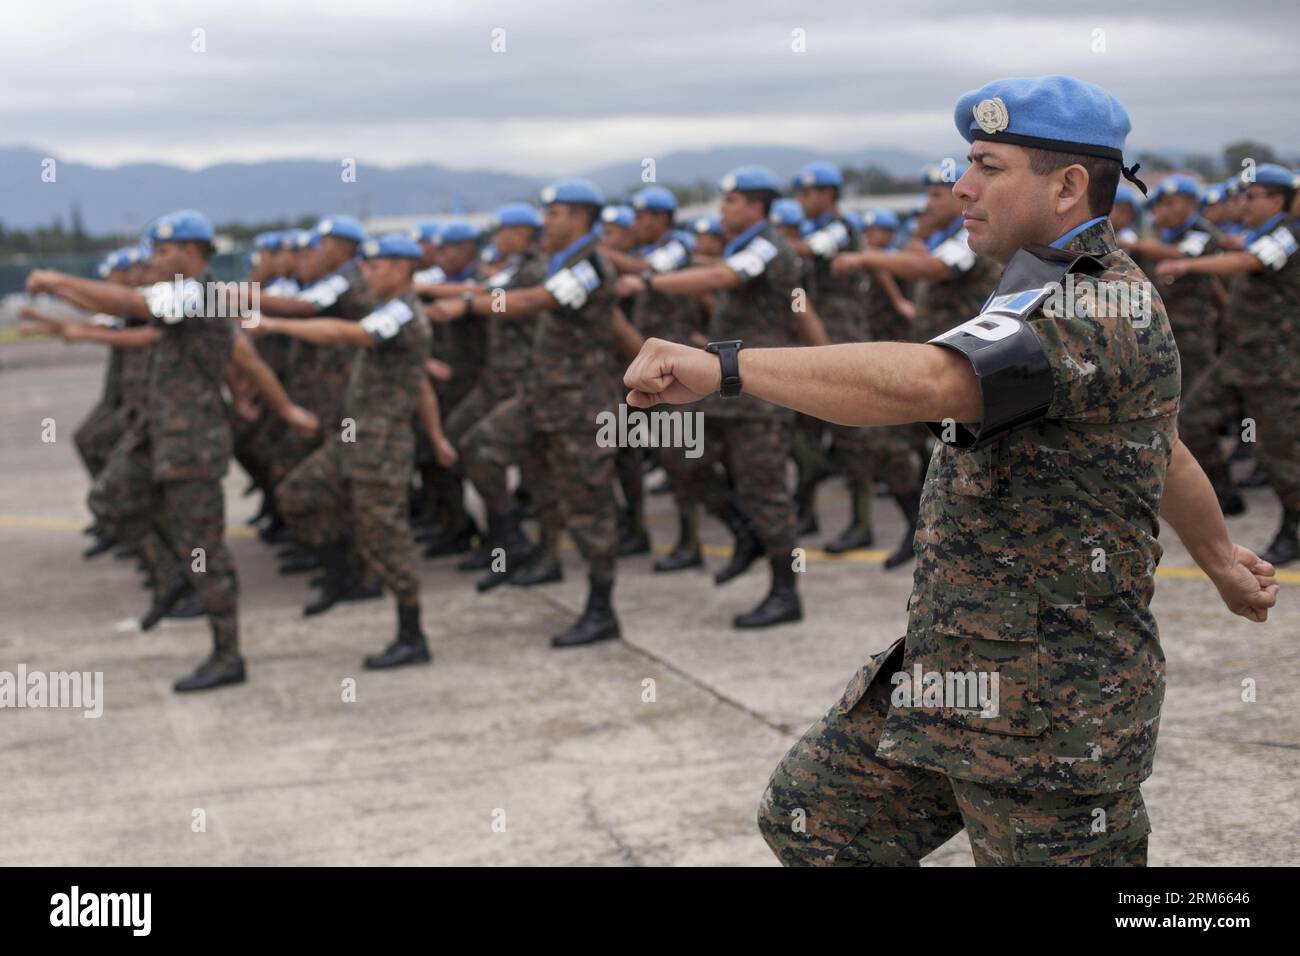 Bildnummer: 60815795  Datum: 10.12.2013  Copyright: imago/Xinhua     GUATEMALA CITY,  -- Soldiers of the United Nations Stabilization Mission in Haiti (MINUSTAH) of Guatemalan Army participate in a parade to commemorate the 92nd anniversary of the Guatemalan Air Force, in Guatemala City, capital of Guatemala, on Dec. 10, 2013. (Xinhua/Luis Echeverria) (rt) (ah) GUATEMALA-GUATEMALA CITY-MILITARY-CELEBRATION PUBLICATIONxNOTxINxCHN Militär Soldat xas x0x 2013 quer premiumd Stock Photo